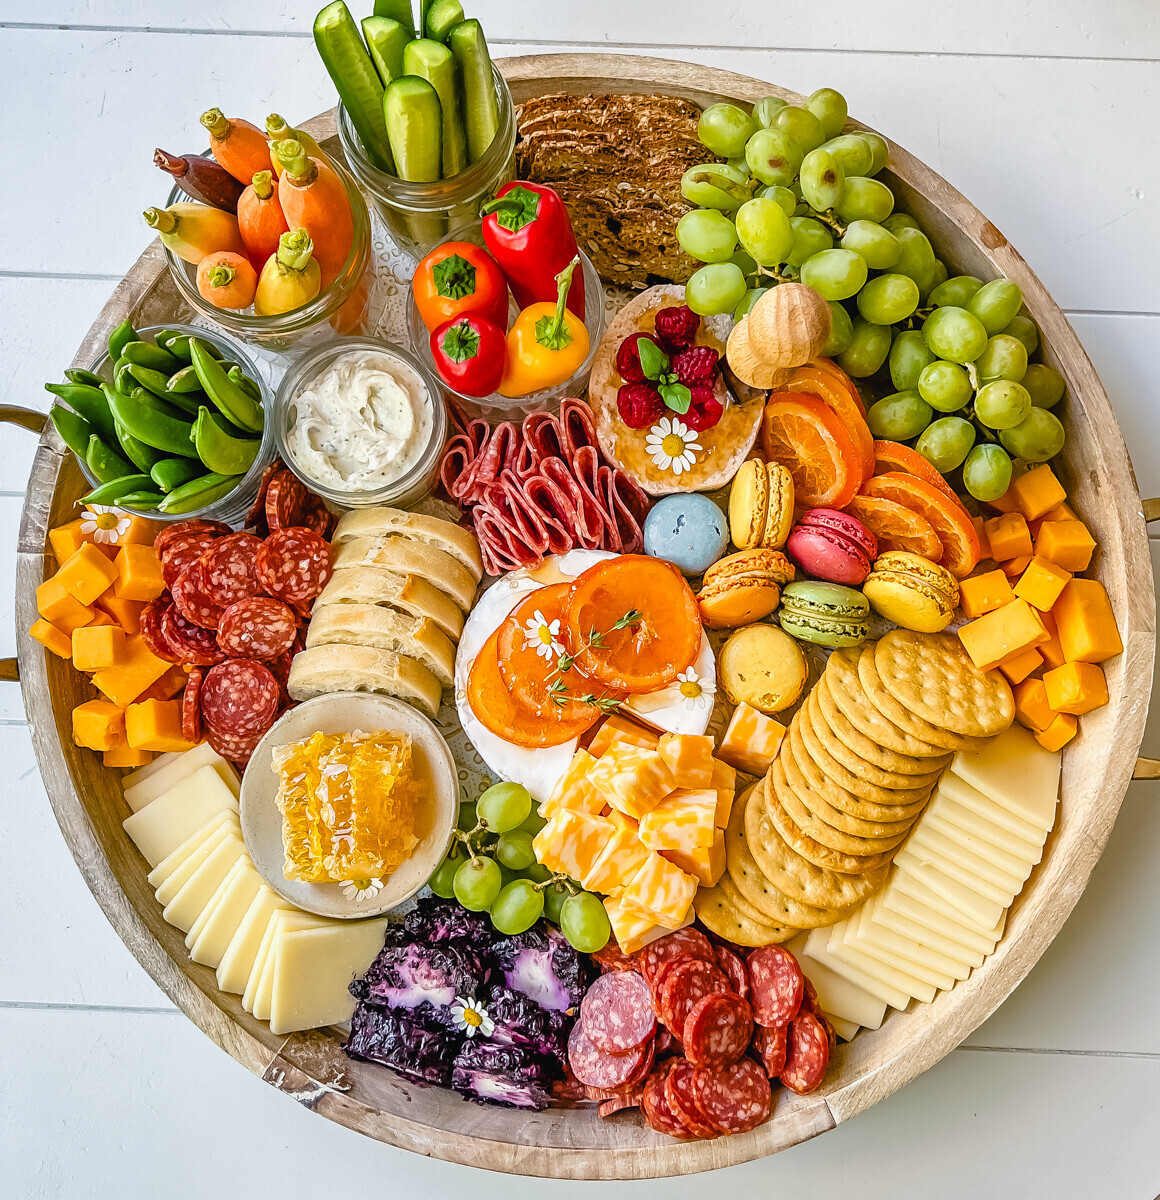 Round charcuterie board with meats, cheese, crackers, and other colorful snacks